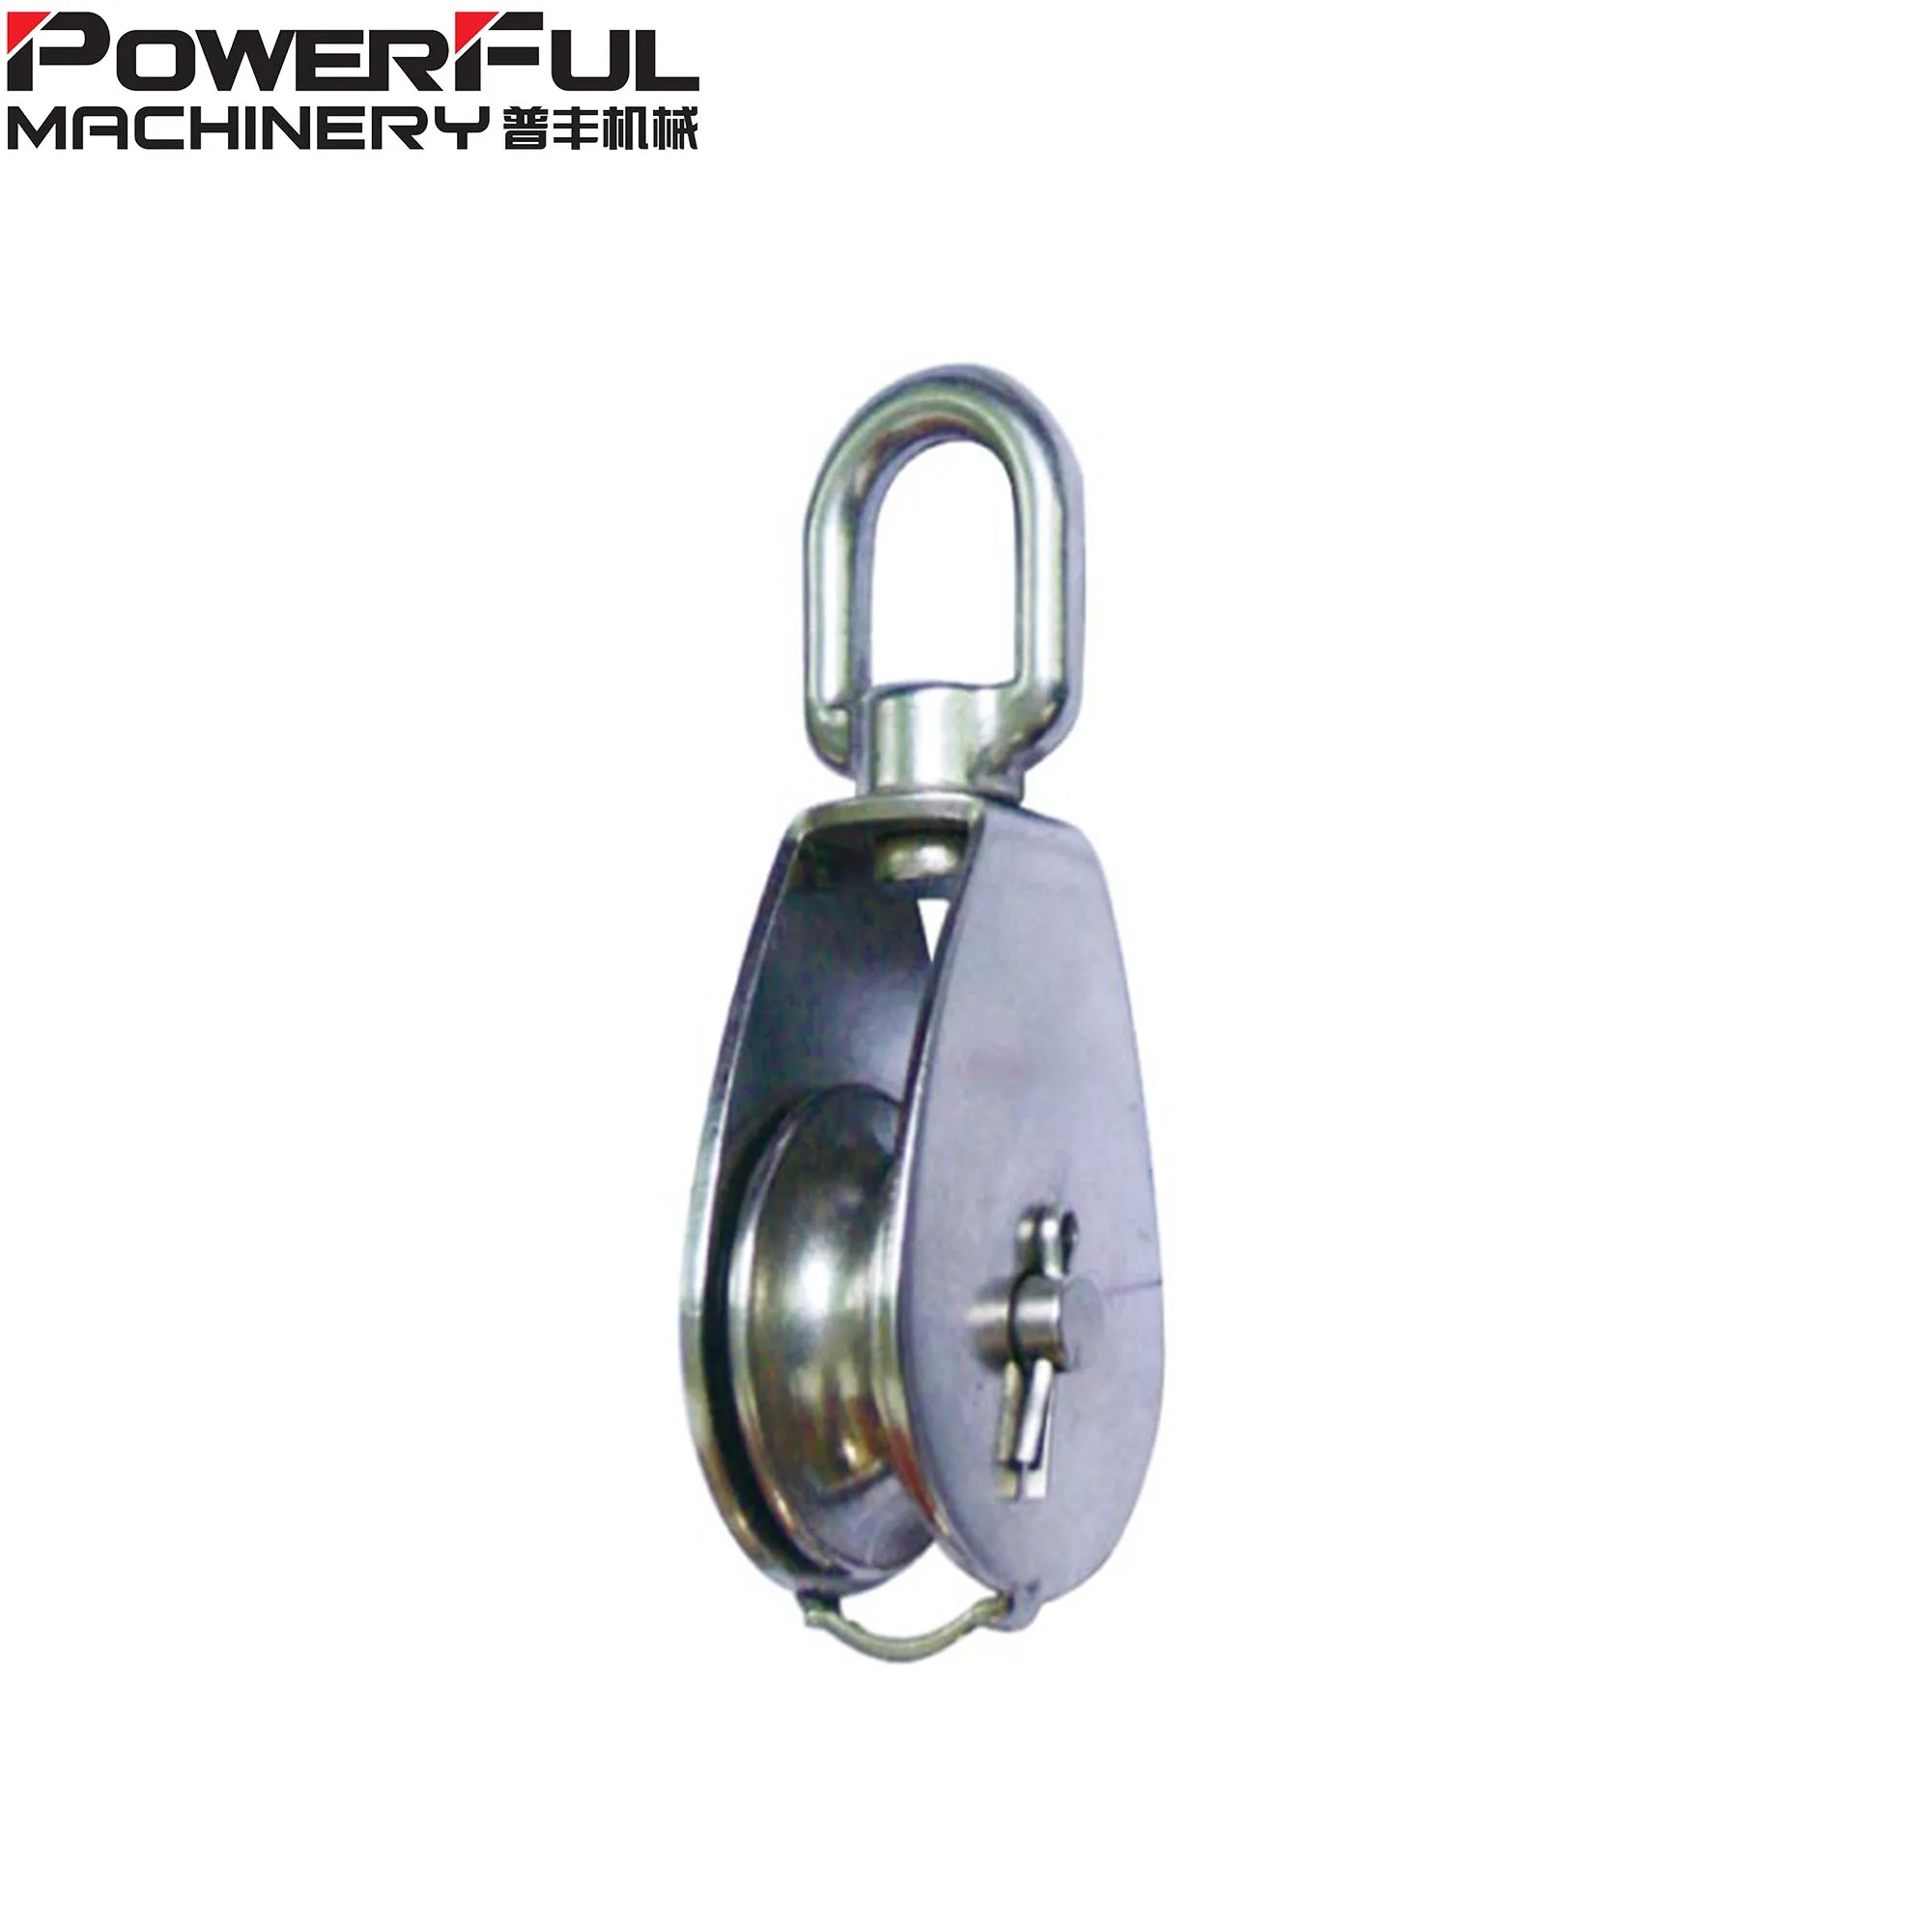 Stainless Steel Single/Double Wheel Swivel Pulley Block Lifting Rope Pulley X 1 